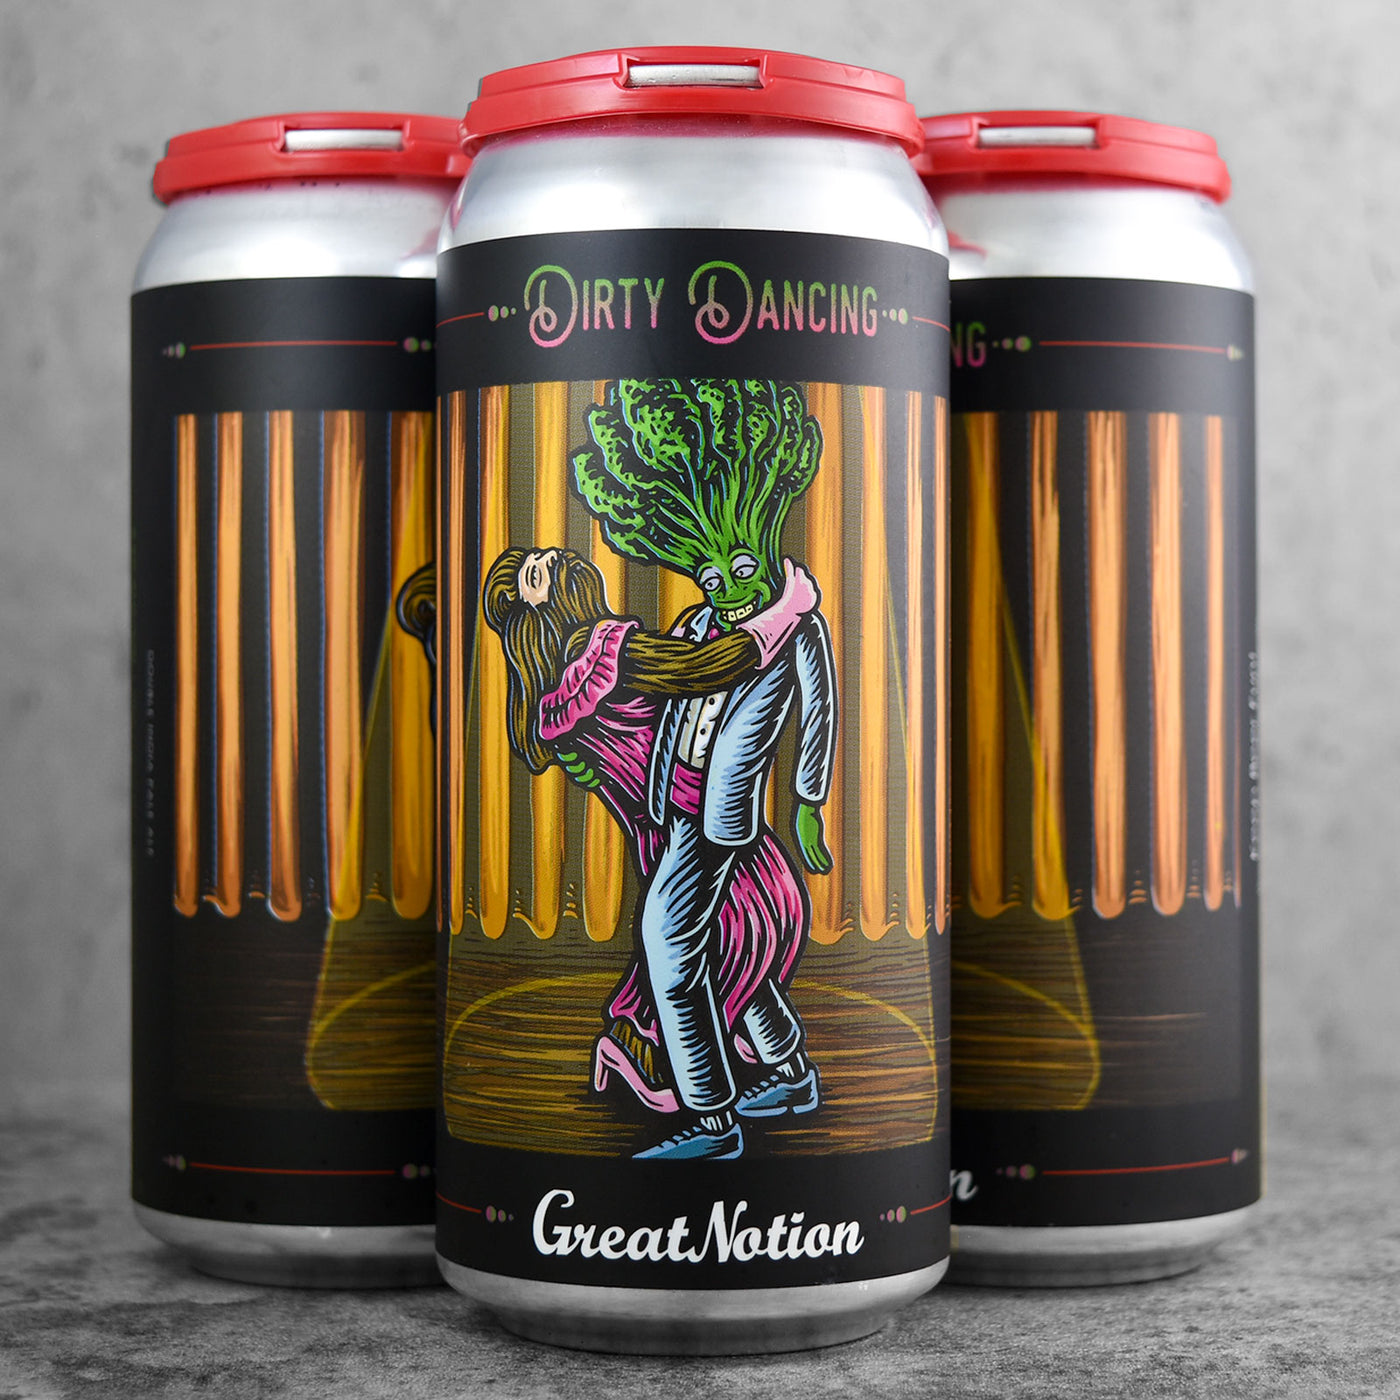 Great Notion x Other Half - Dirty Dancing